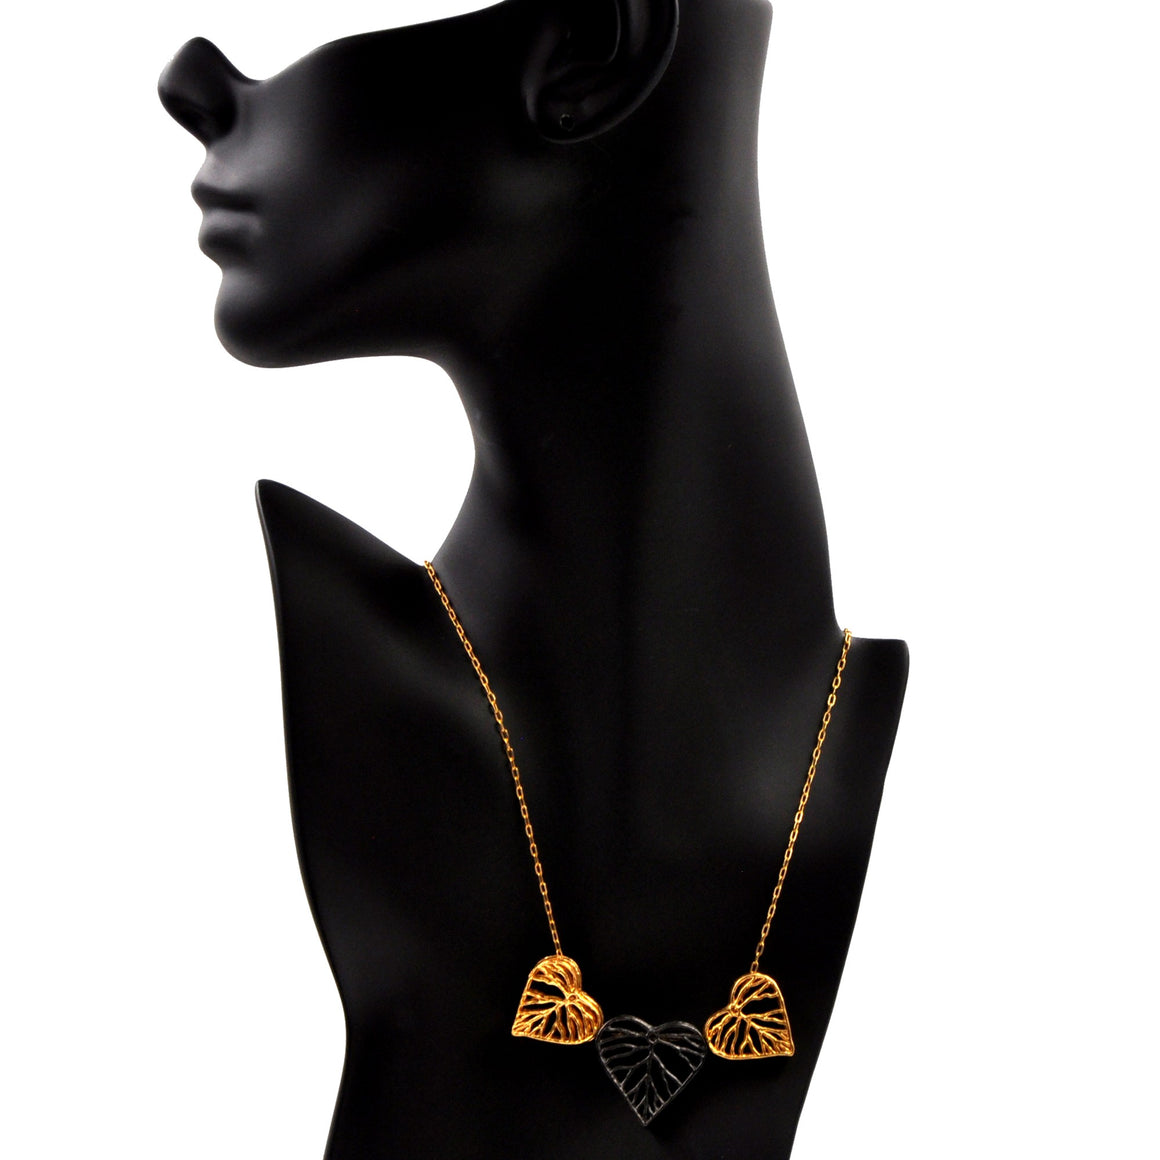 Heart Leaf Dimensional Necklace (Three Hearts) - 24K Gold Plated